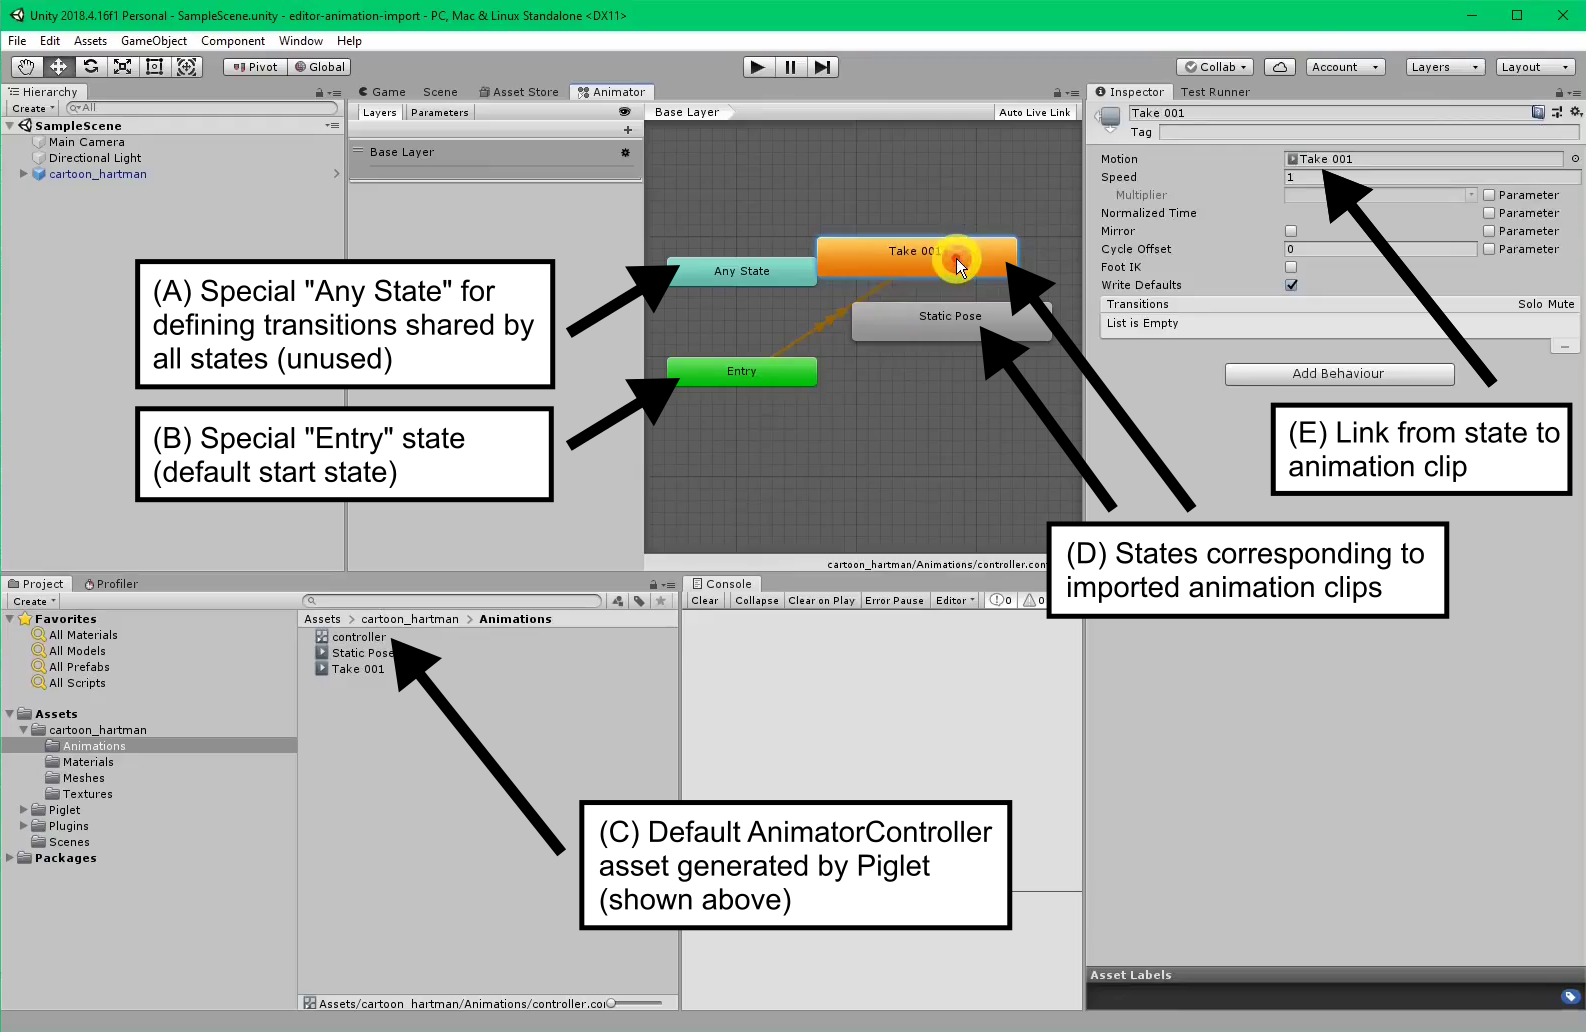 Figure 5: An example AnimatorController used for playing Editor-imported animation clips at runtime. An AnimatorController is a state machine used by the Animator component to determine which animation clip to play at any given time. Piglet creates a default AnimatorController asset called “controller” in the Animations subdirectory (C). This controller contains one state per animation clip (D) and two special states that are present in every AnimatorController: “Any State” (A) and “Entry” (B). For regular controller states, the link between the state and its corresponding animation clip is set by the Motion field (E).